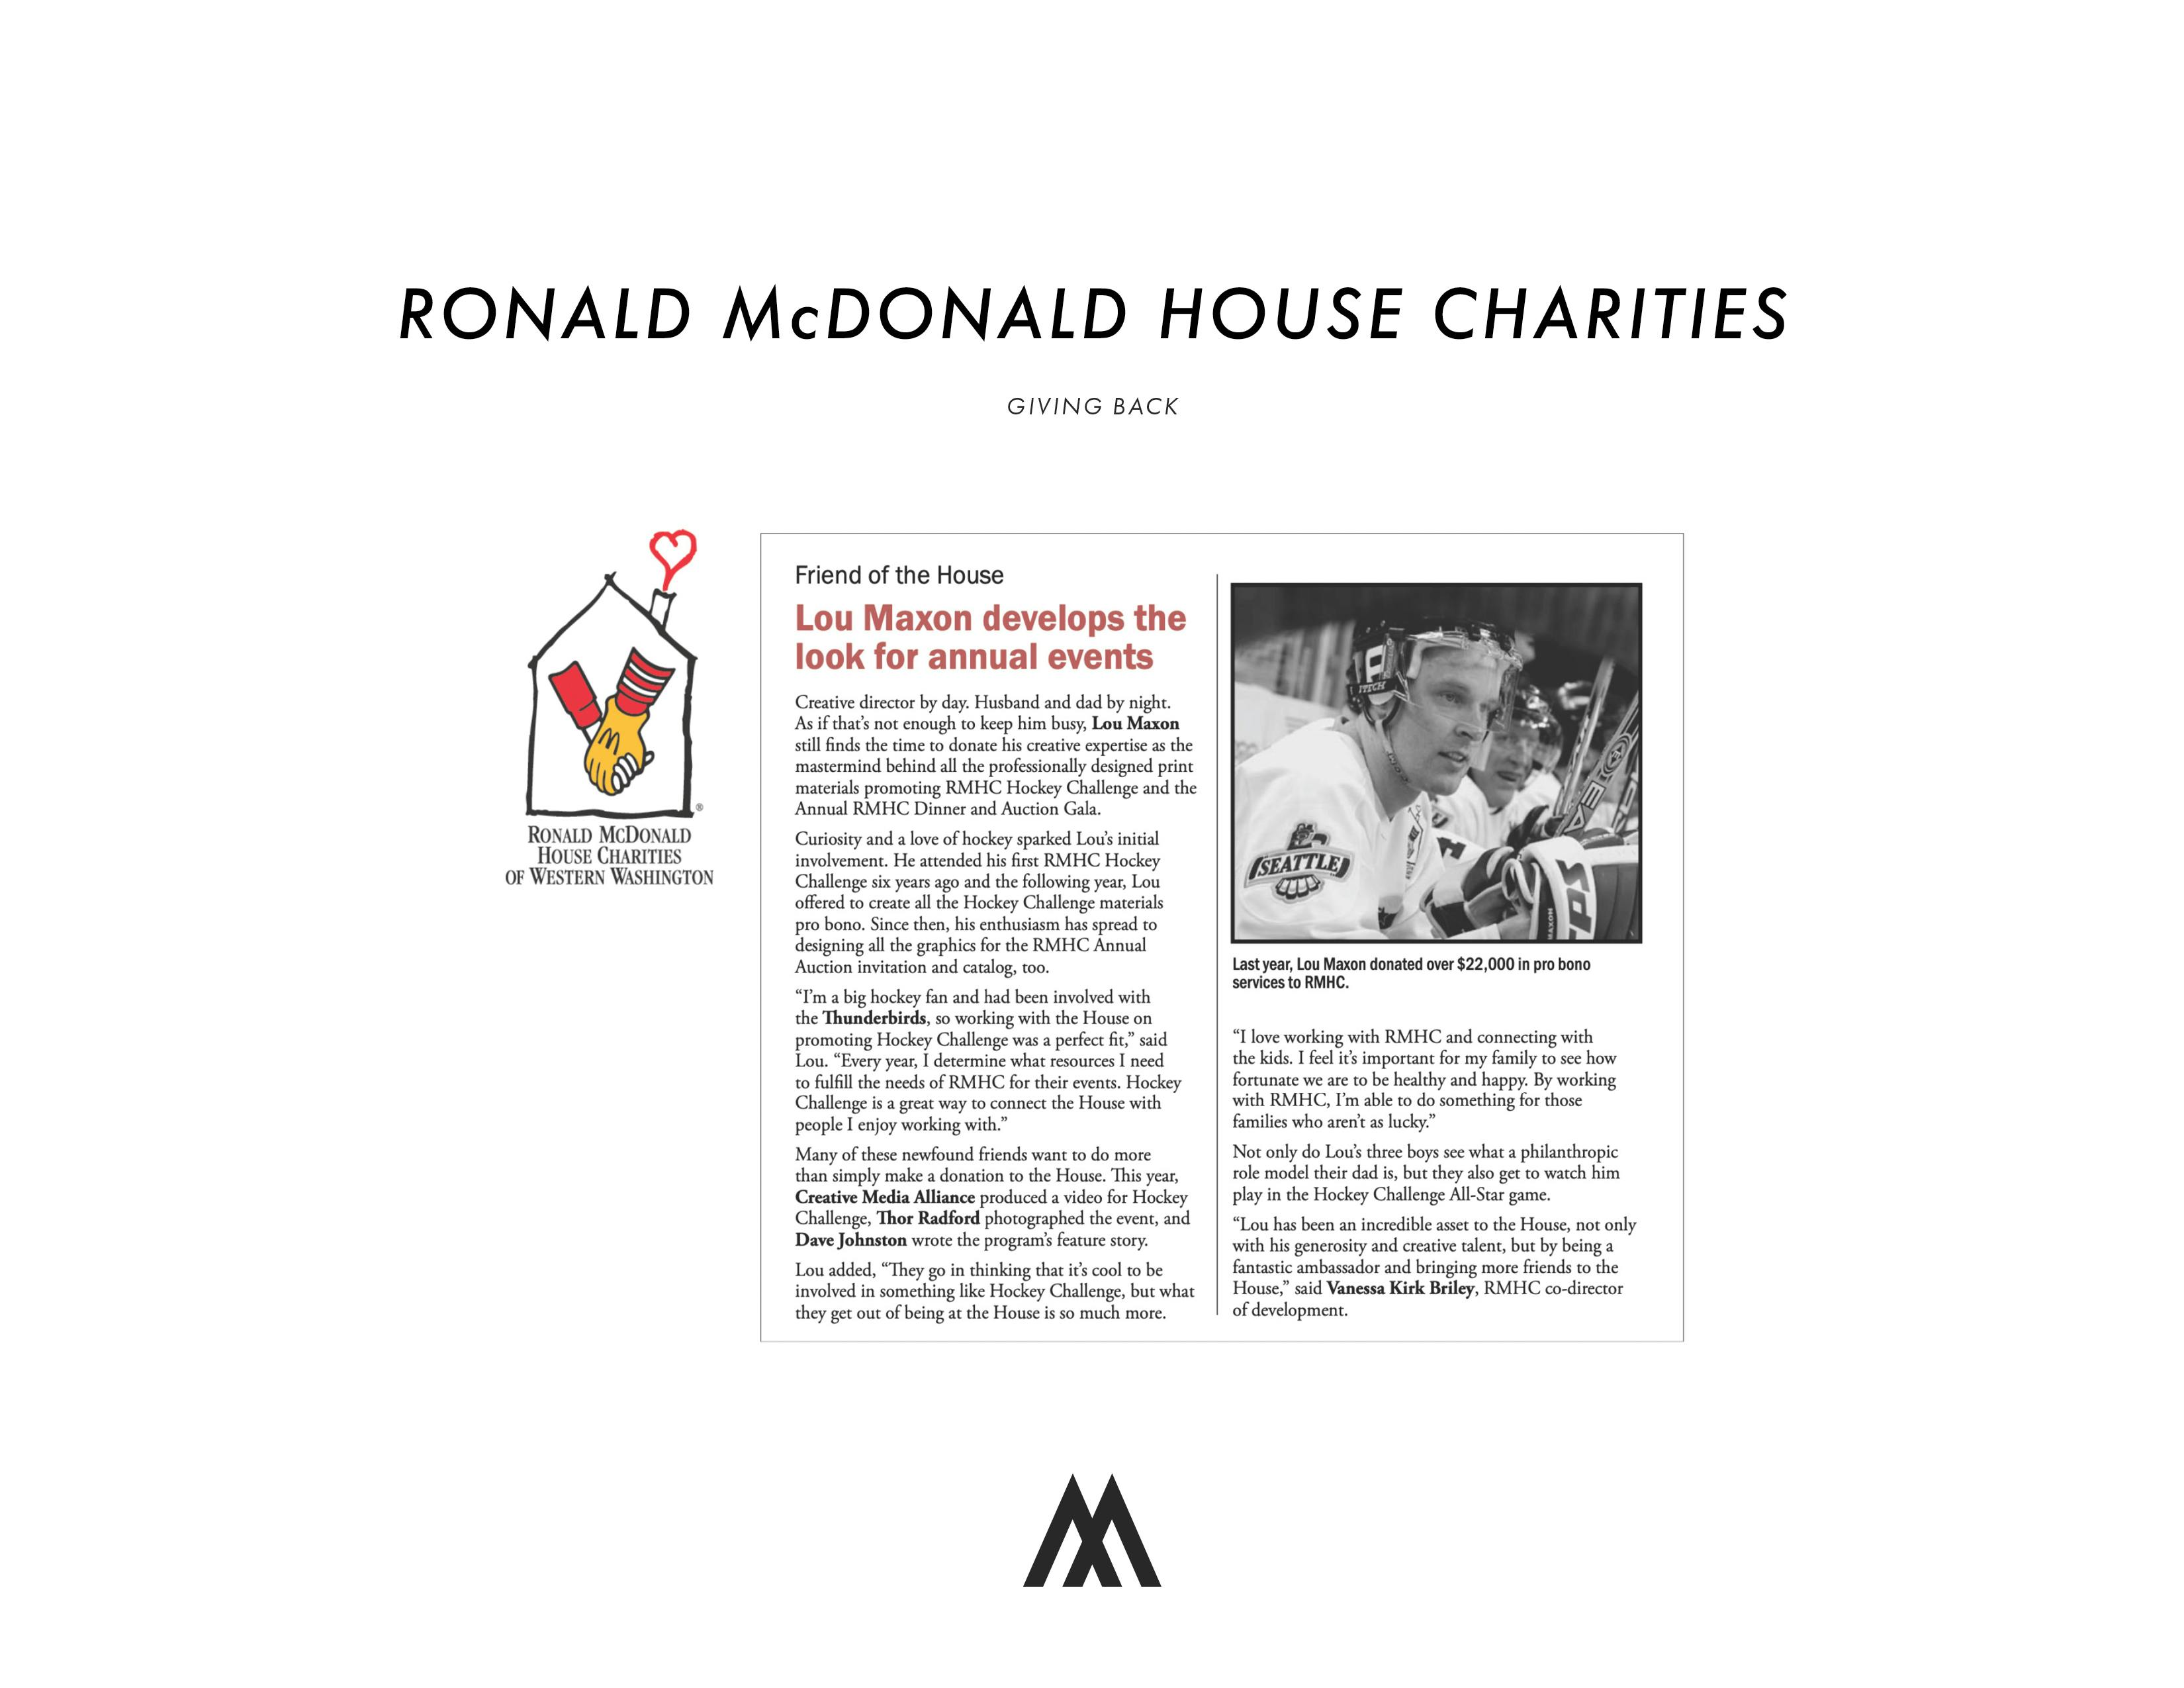 Article about Ronald McDonald House Charities